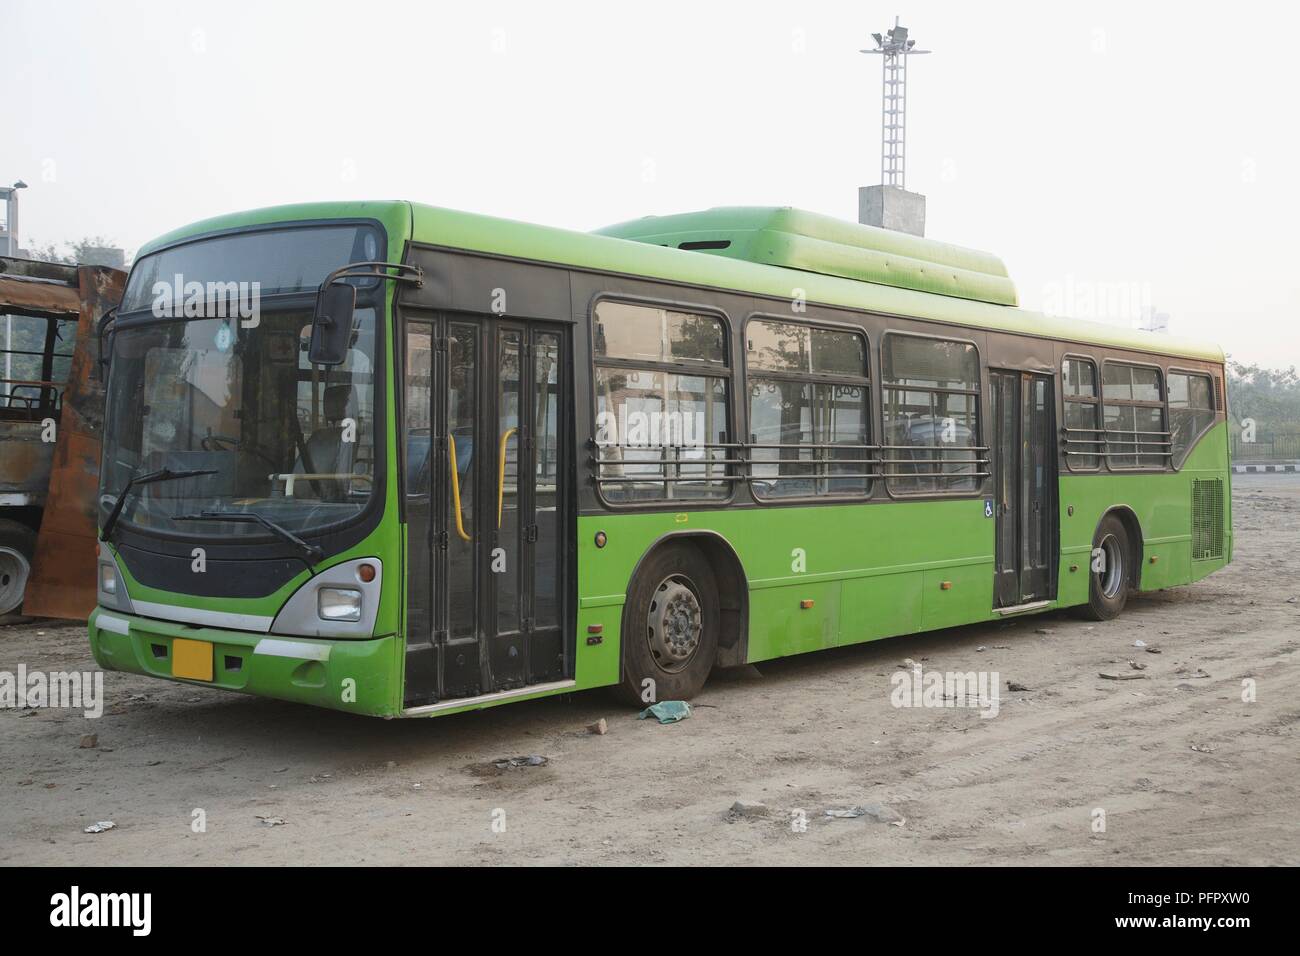 India, Delhi, bus parked in bus yard Stock Photo